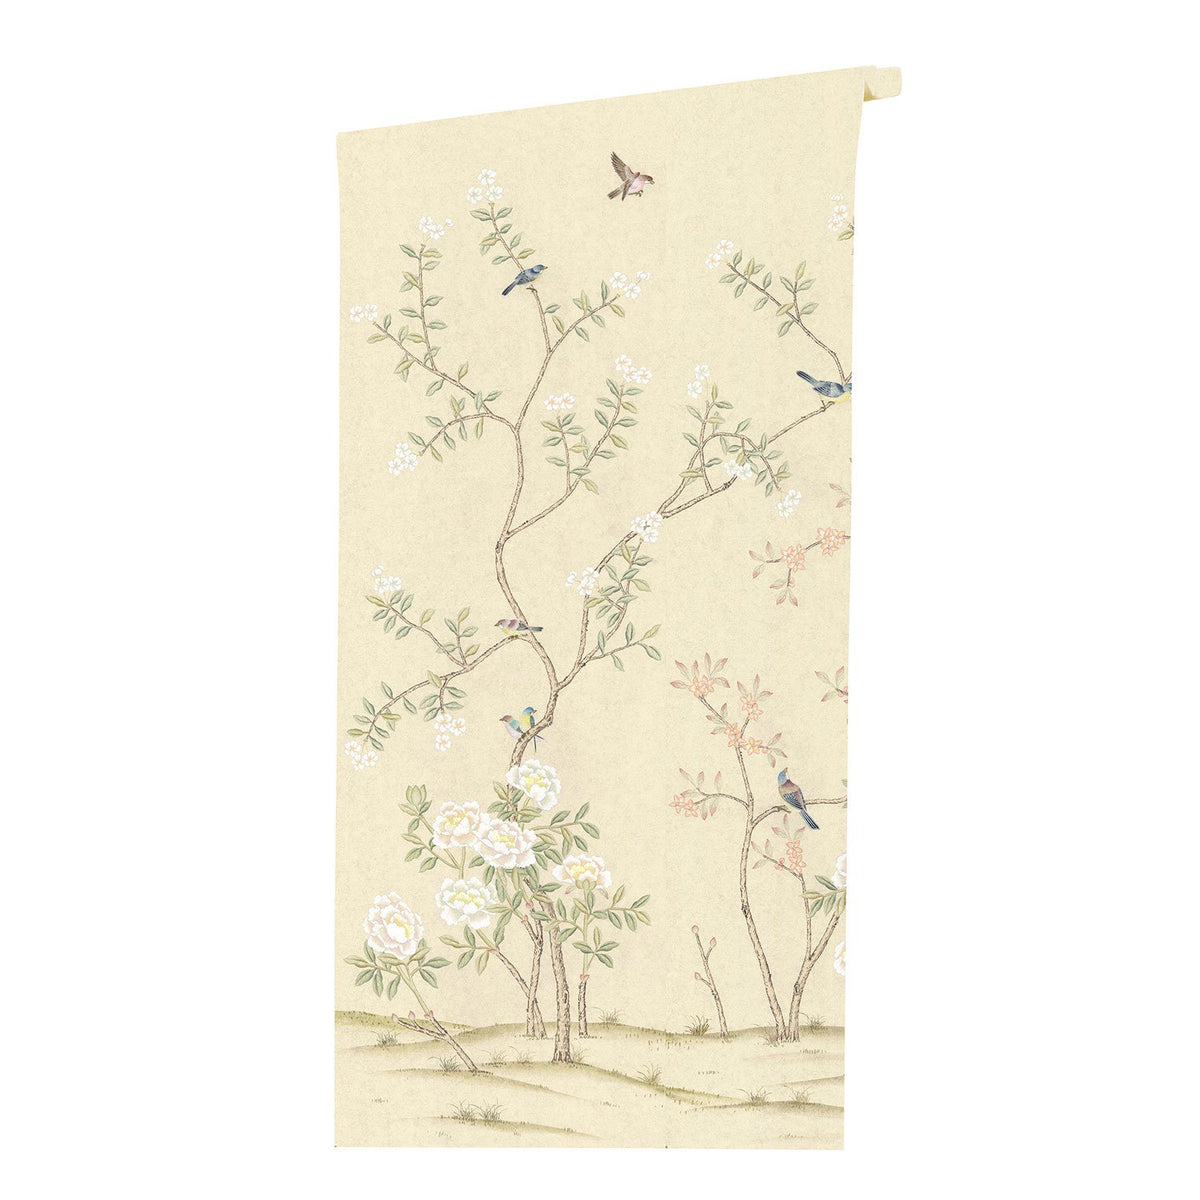 Chinoiserie Abingdon Wallpaper in Cream Floral Mural on Roll